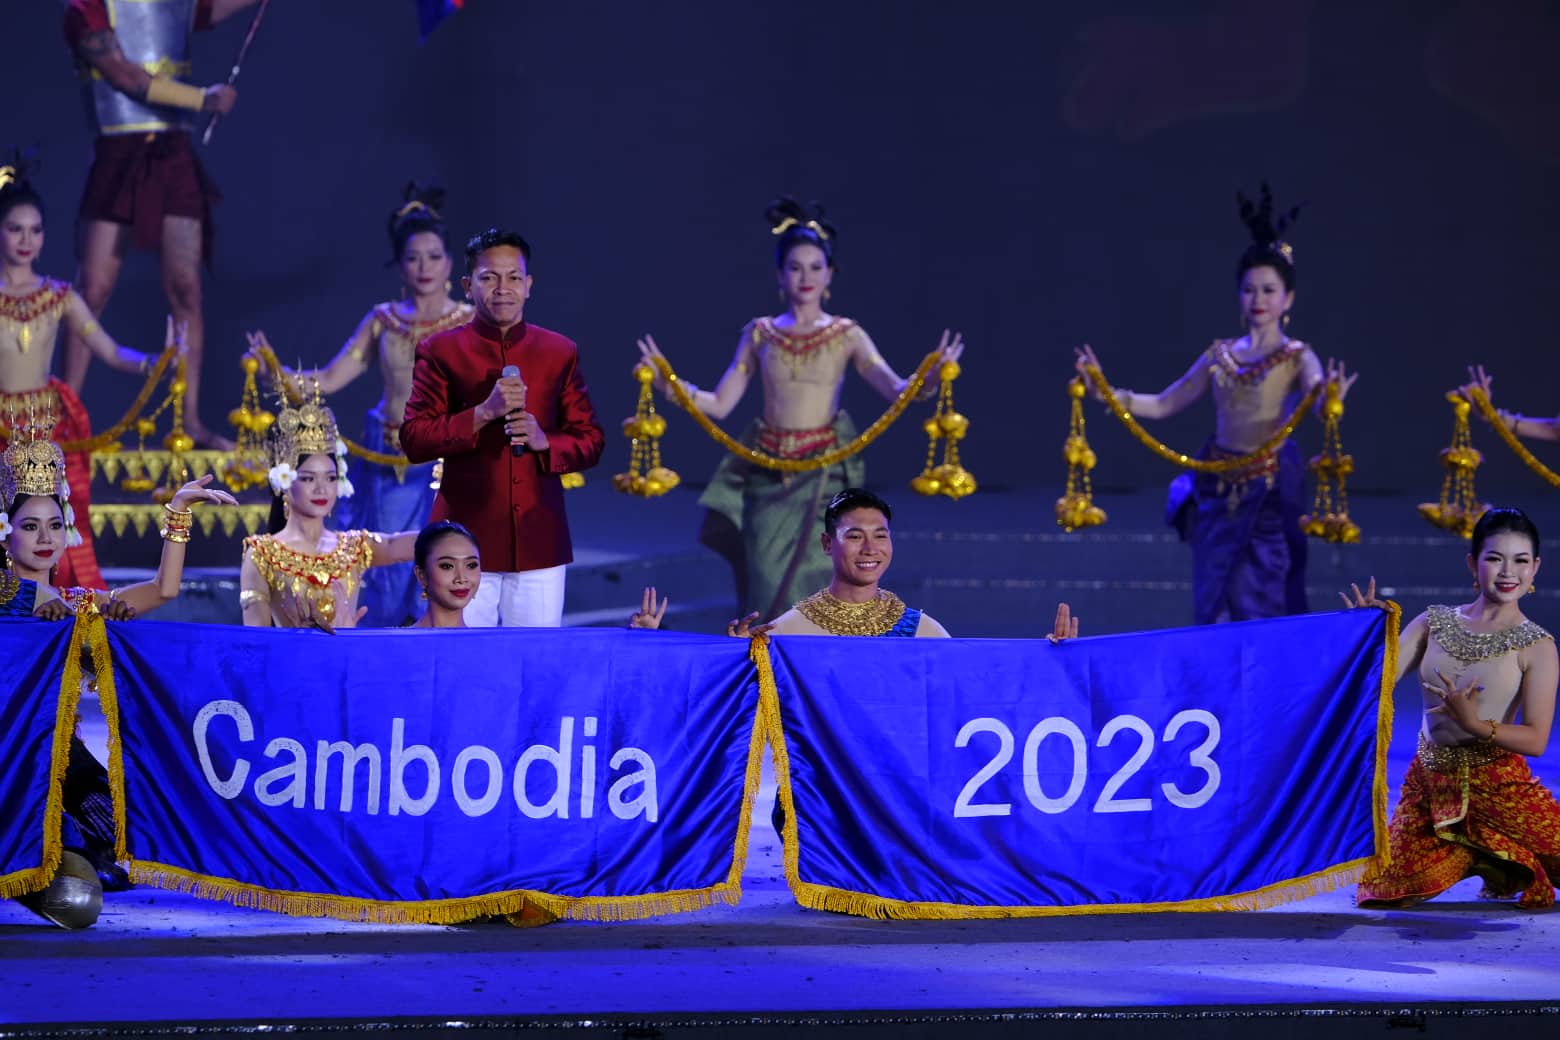 A performance by Cambodia, which will host the 2023 edition of the SEA Games, at the 31st SEA Games closing ceremony in Hanoi, May 23, 2022. Photo: Nam Tran / Tuoi Tre